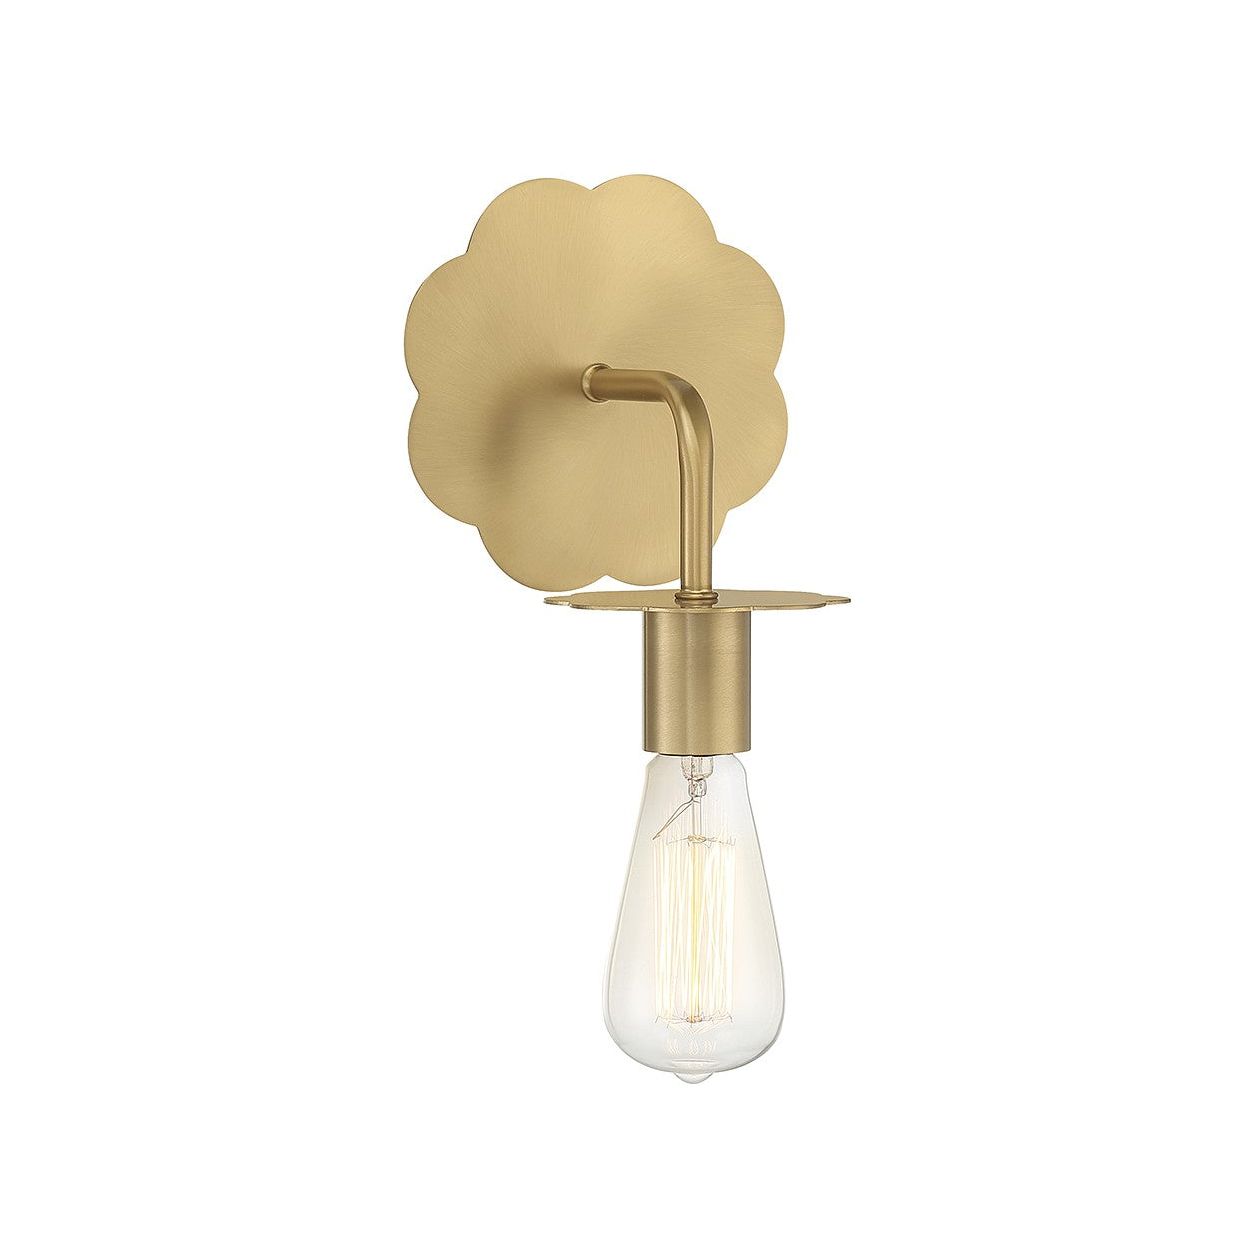 Meridian - M90104NB - One Light Wall Sconce - Natural Brass